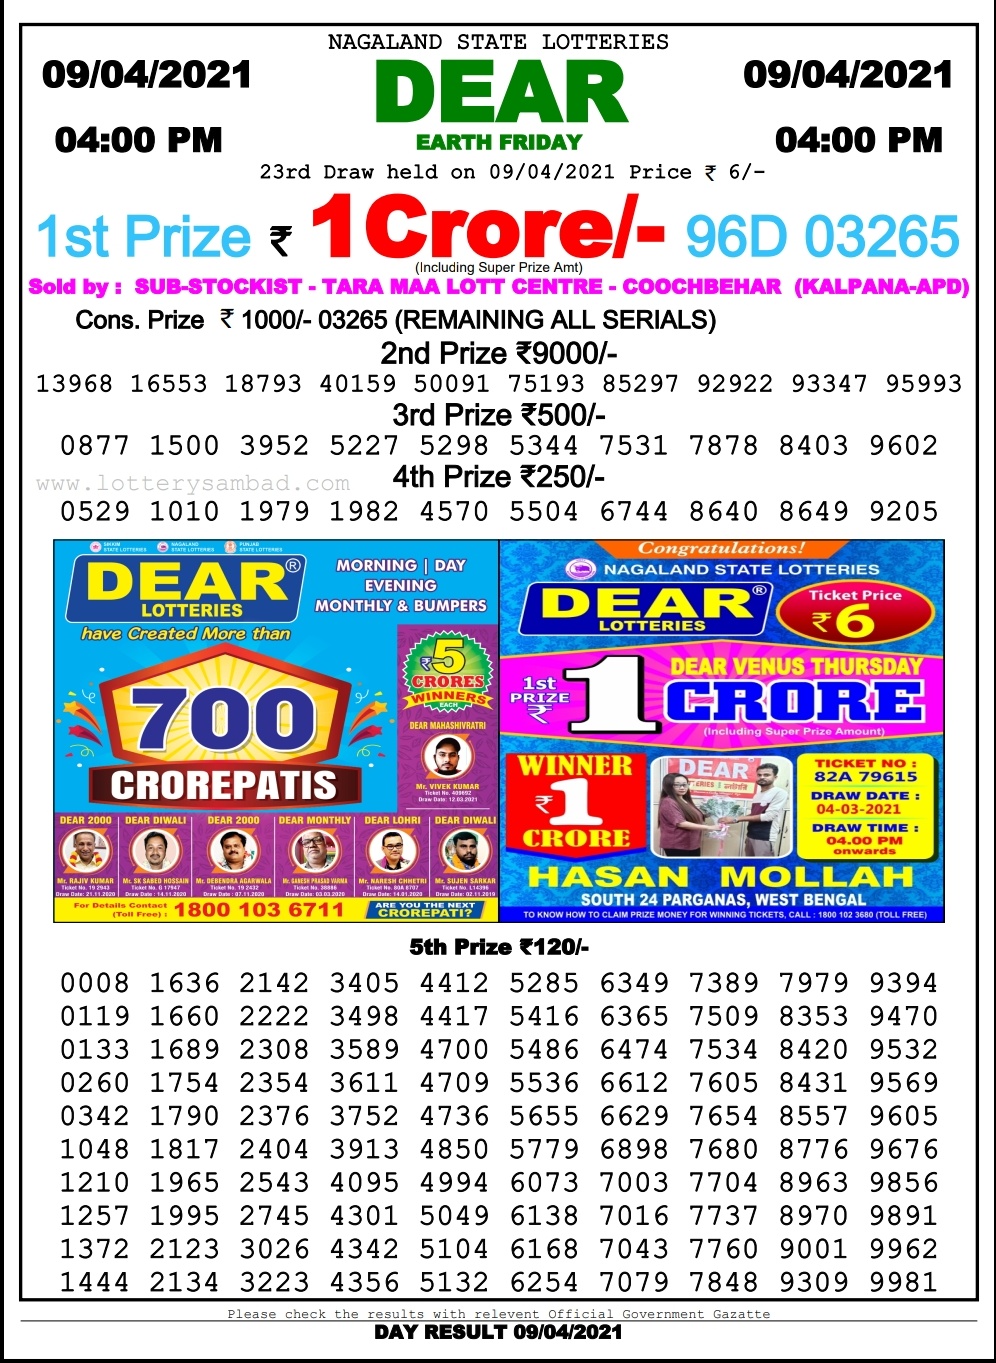 Dear 04.00 PM lottery result 09.04.2021